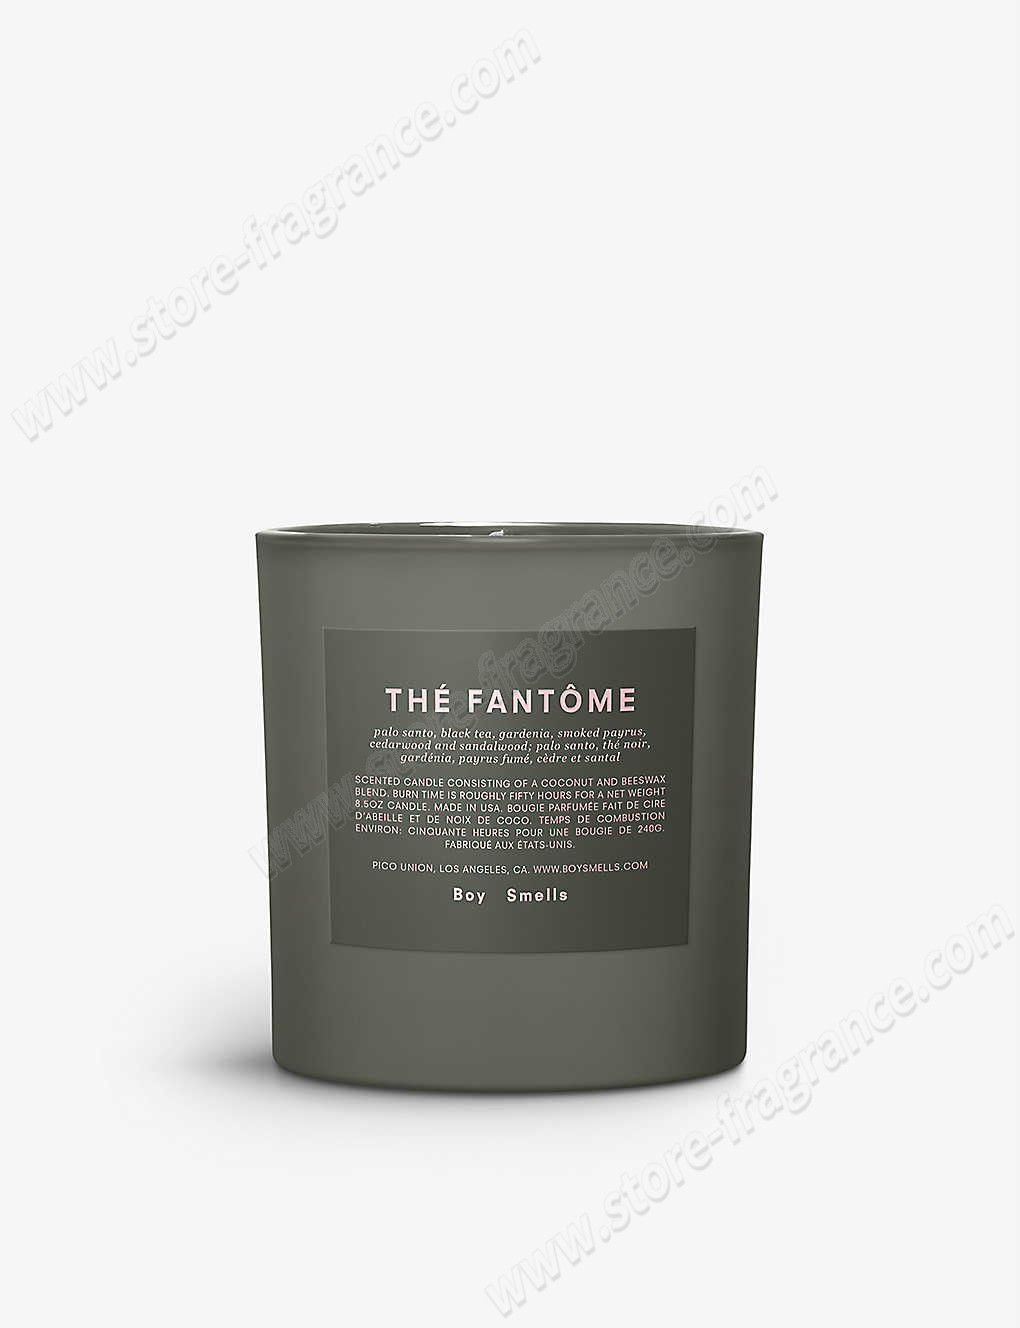 BOY SMELLS/Thé Fantome scented candle 240g ✿ Discount Store - BOY SMELLS/Thé Fantome scented candle 240g ✿ Discount Store